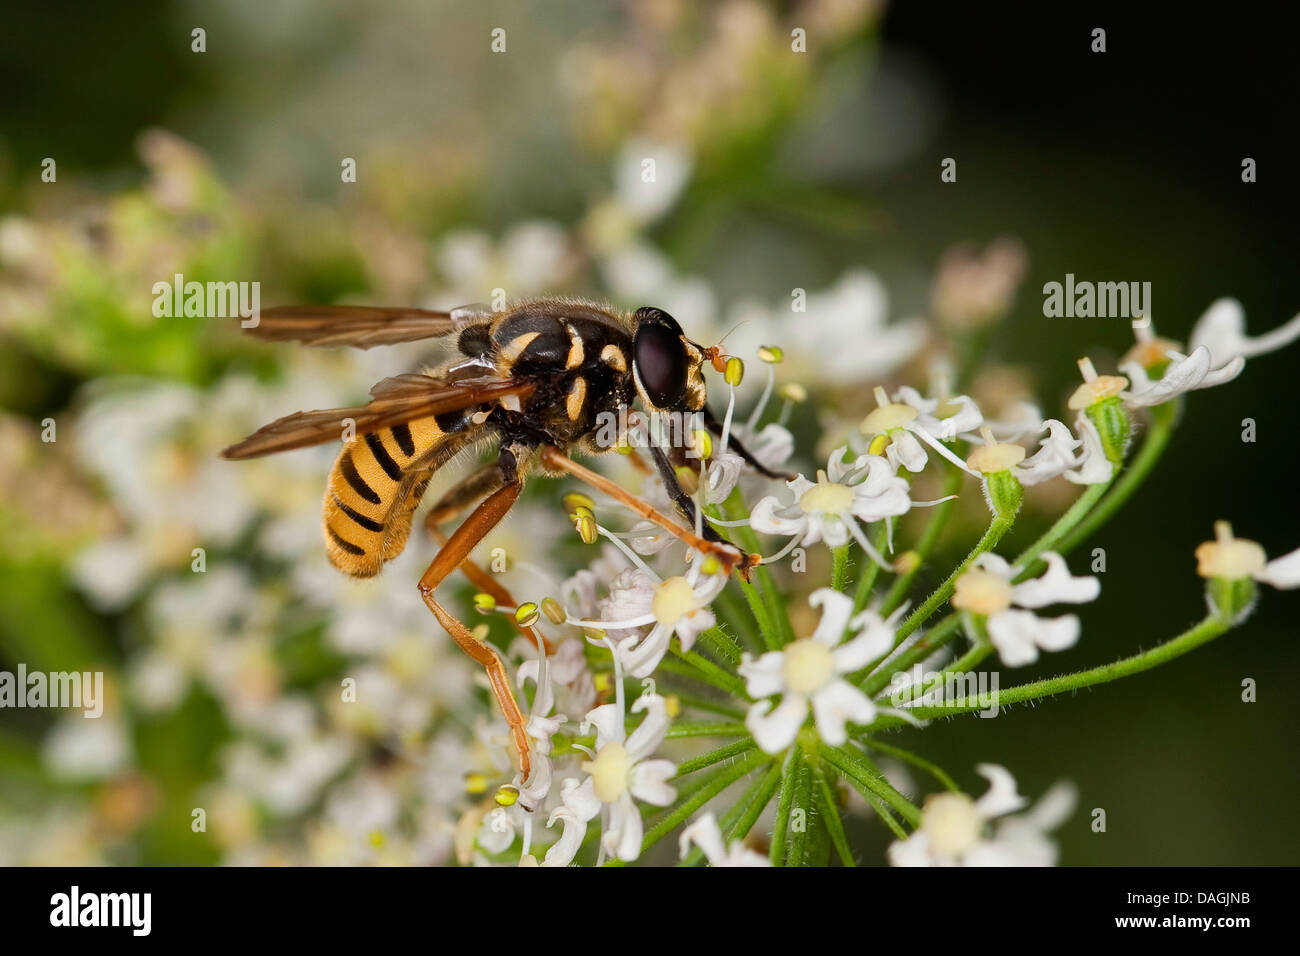 Hover fly (Temnostoma vespiforme), on flowers of an umbellifer, Germany Stock Photo